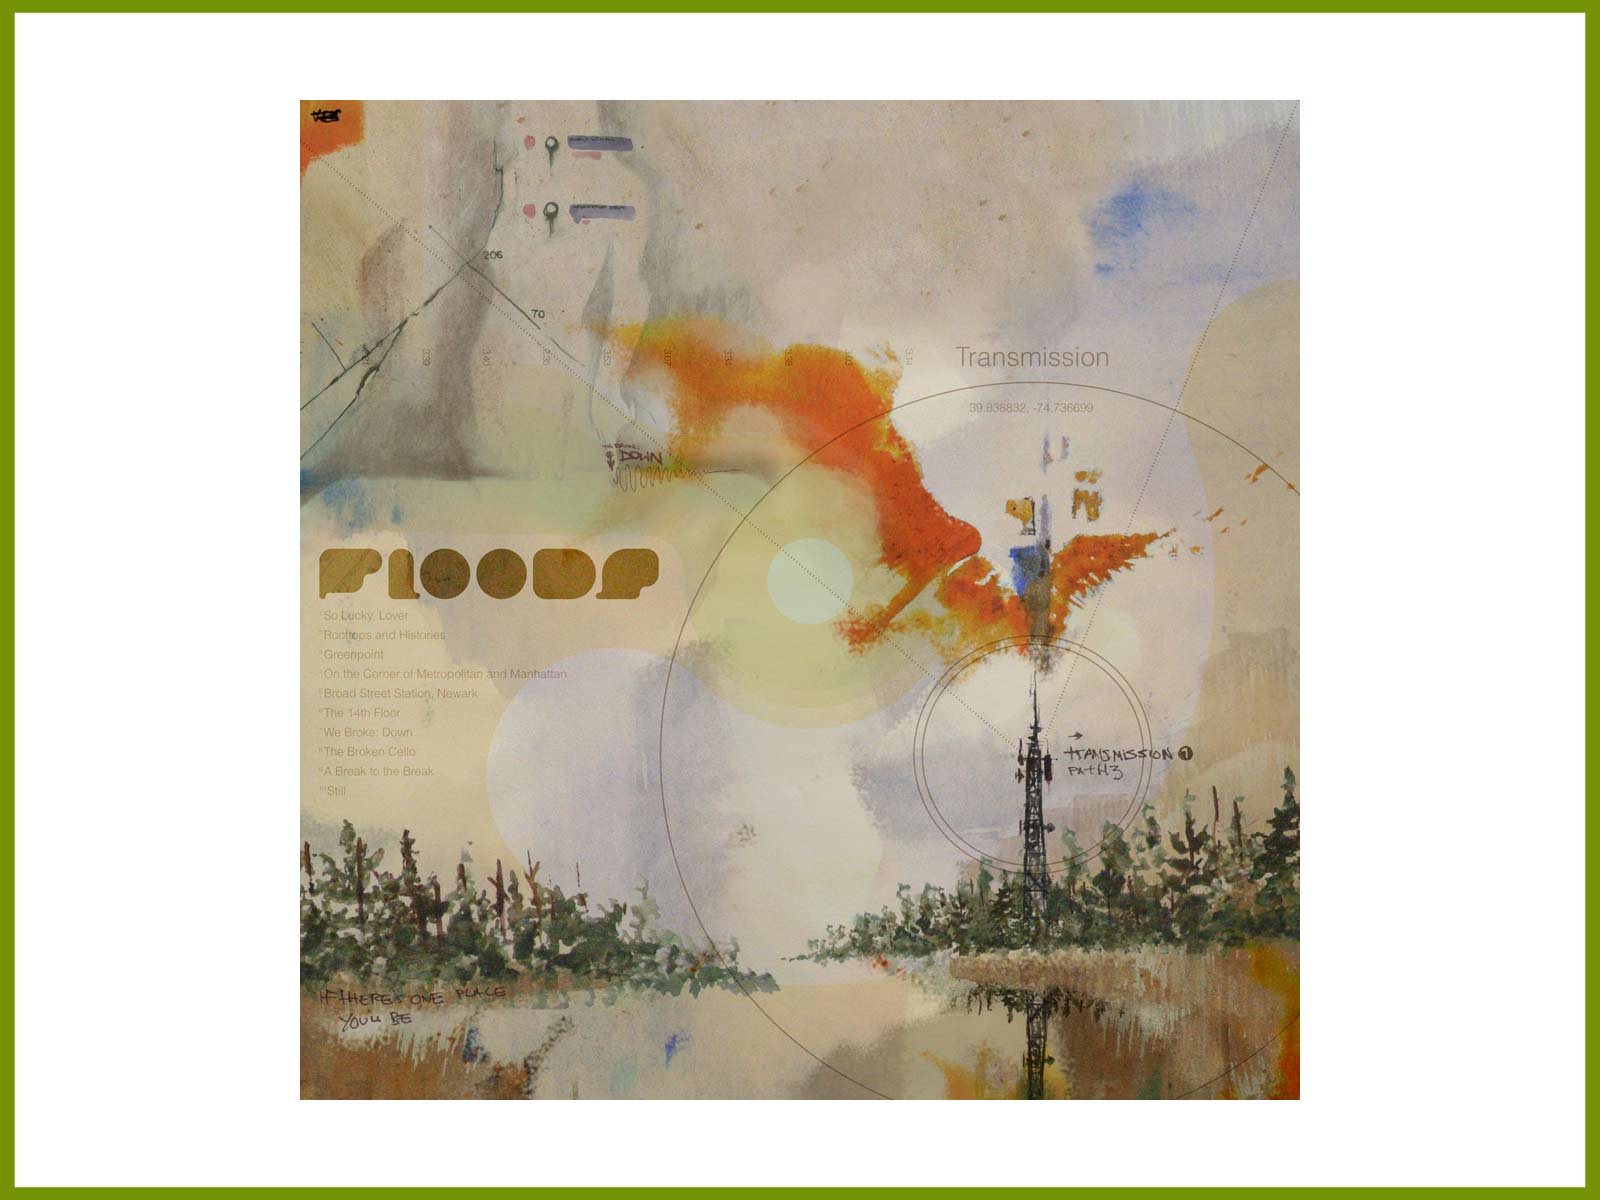 Get Floods “Transmission” in FLAC & MP3; See new Website